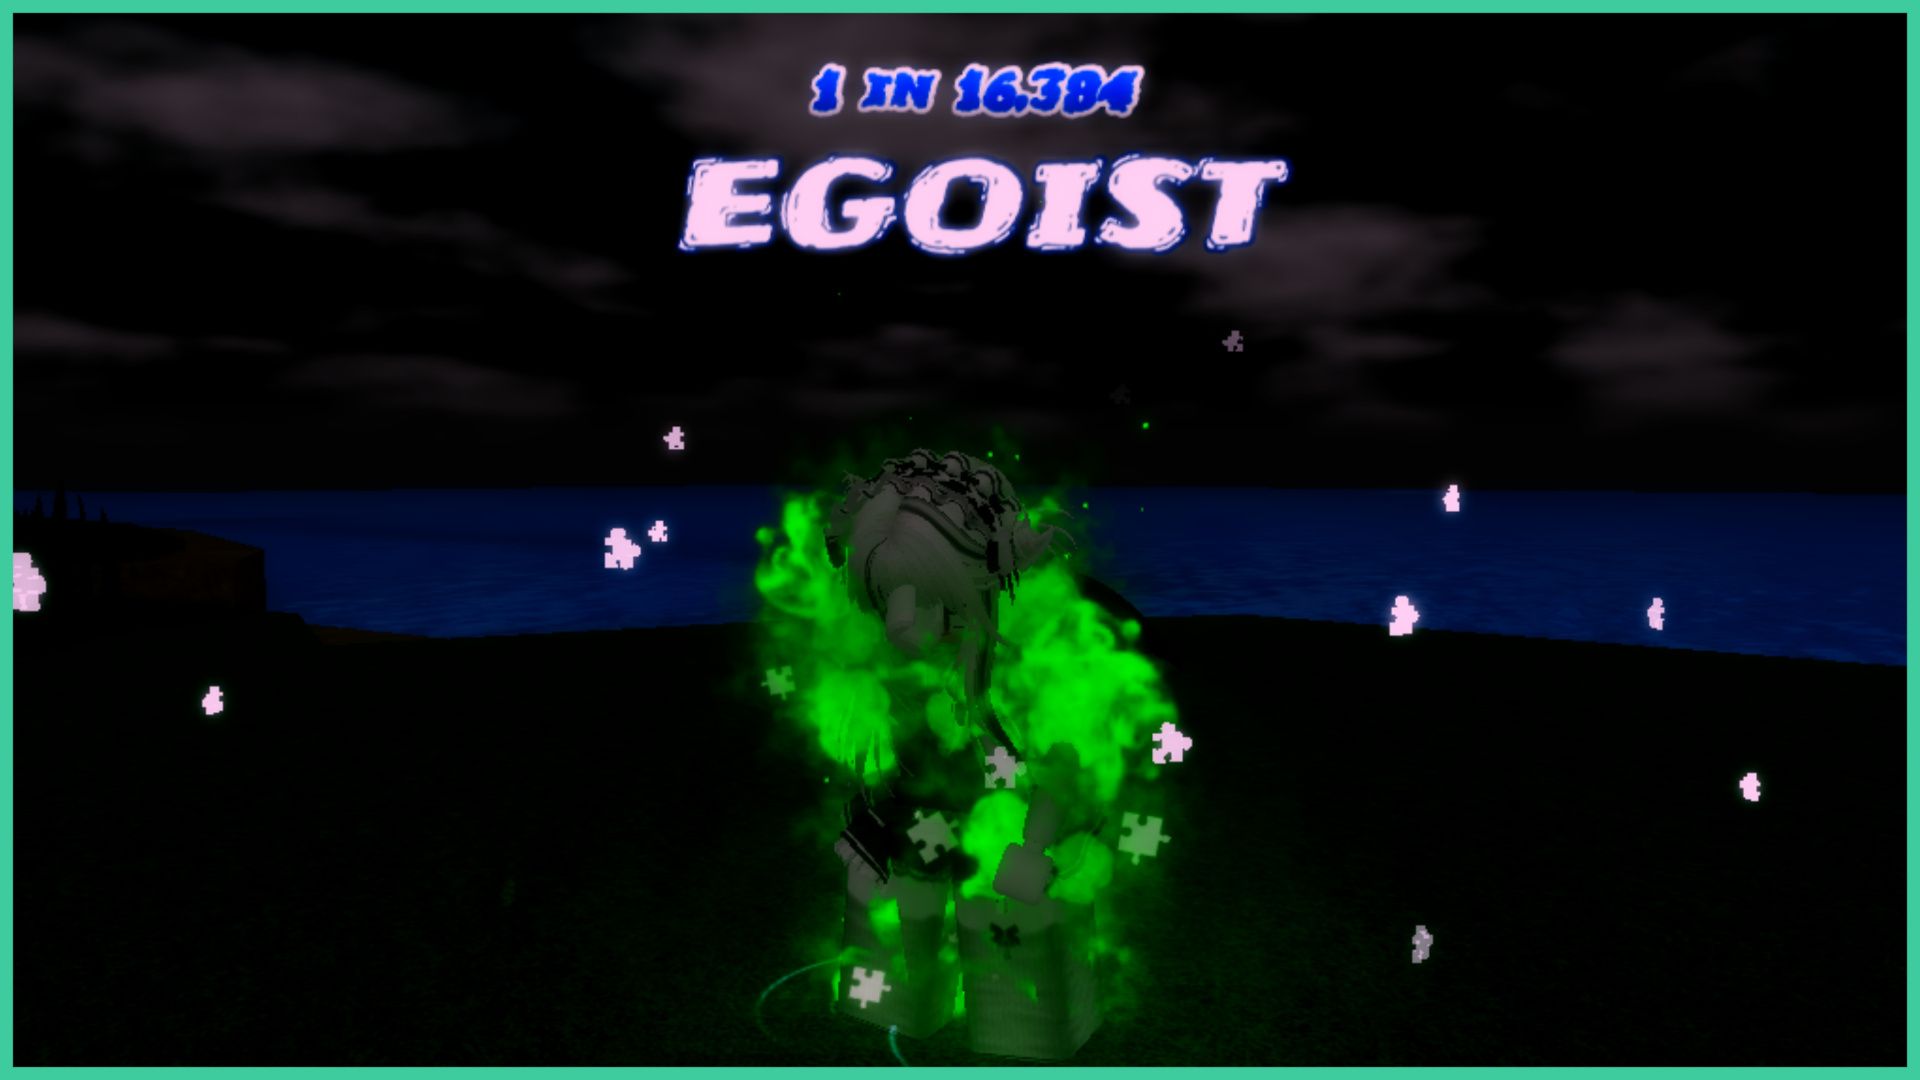 feature image for our anime roulette quests guide, the image is a screenshot of a player with the egoist aura, which is inspired by blue lock, as they clutch their head, with neon green mist around them, and floating jigsaw pieces